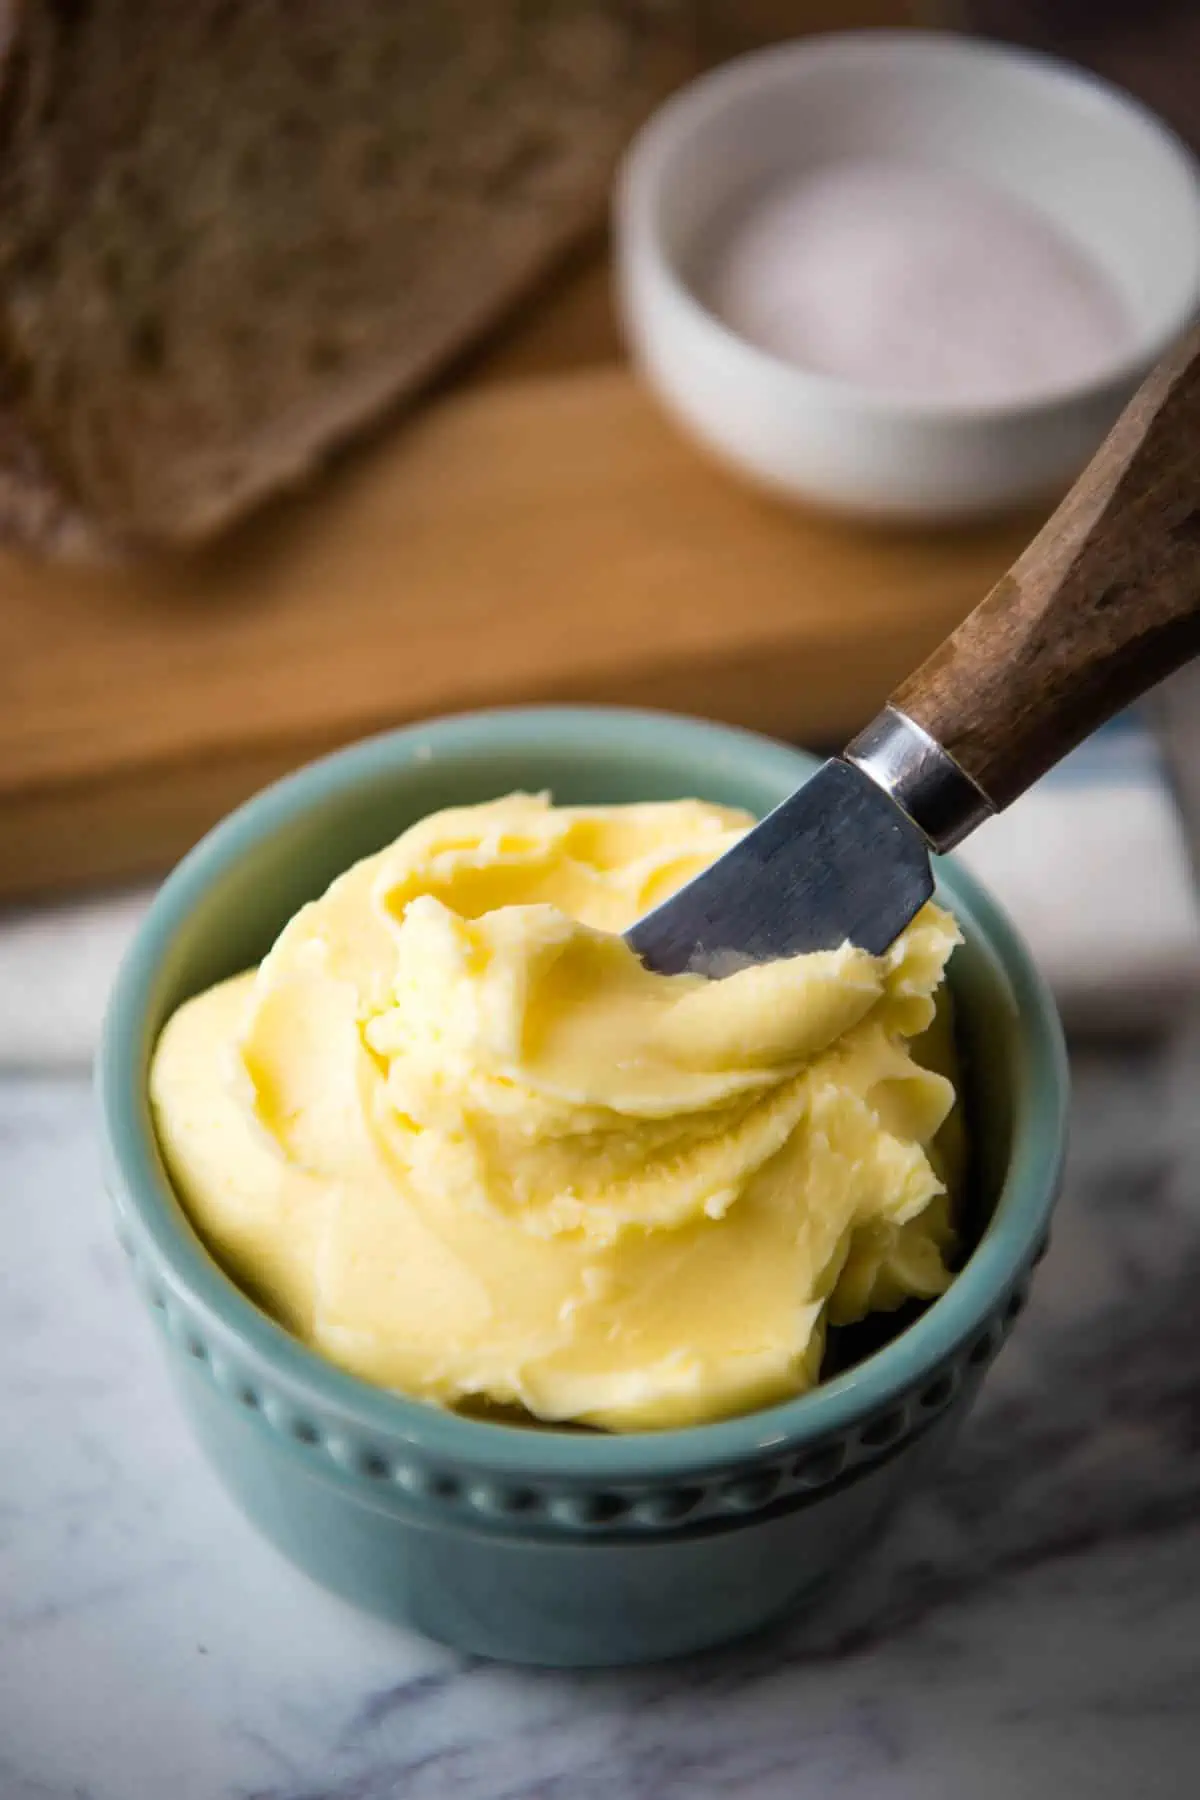 homemade salted butter in blue ramekin with butter knife in it, in front of wood cutting board with sliced bread and small bowl of sea salt